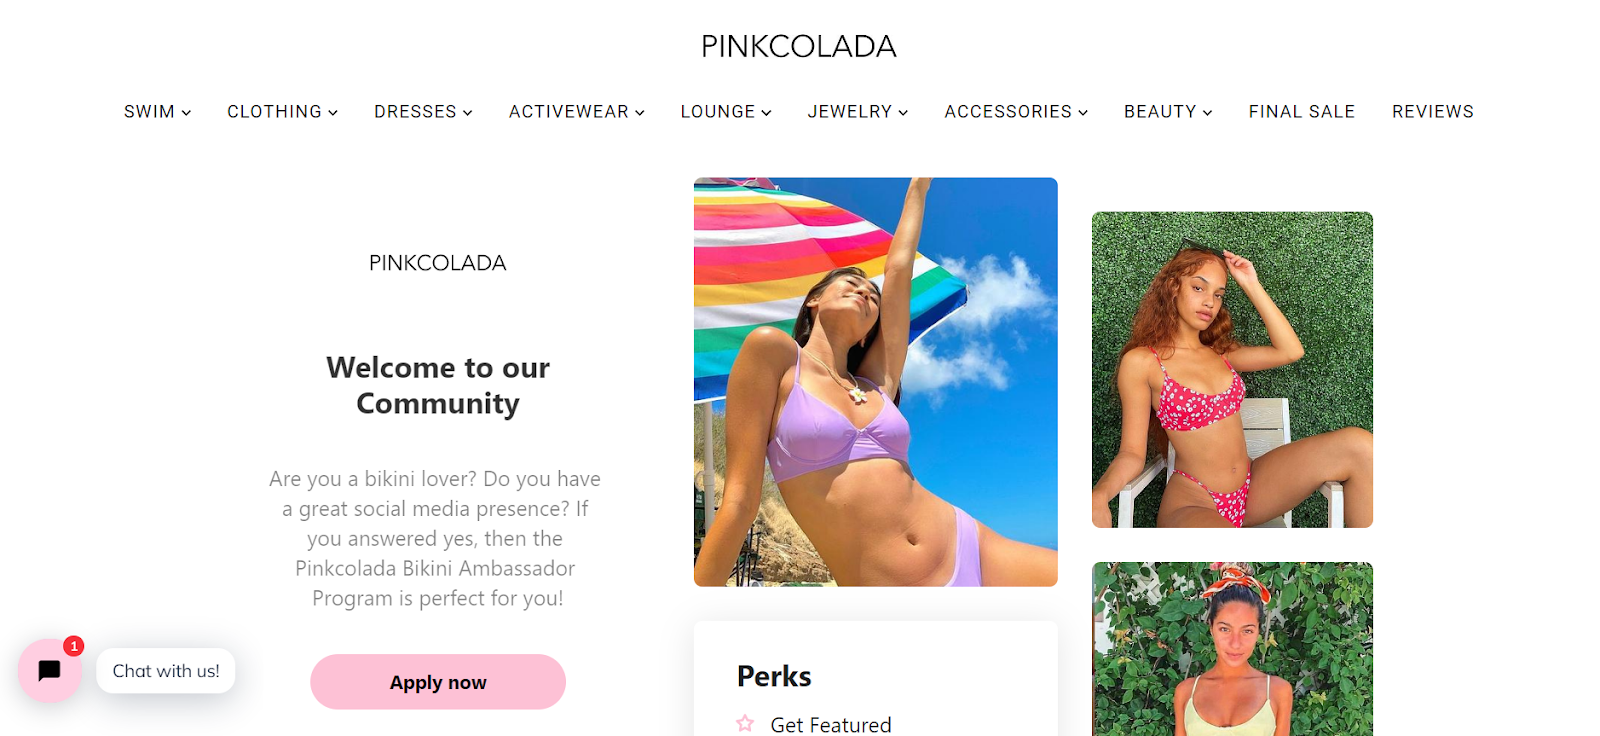 All About the PINKCOLADA Influencer Program